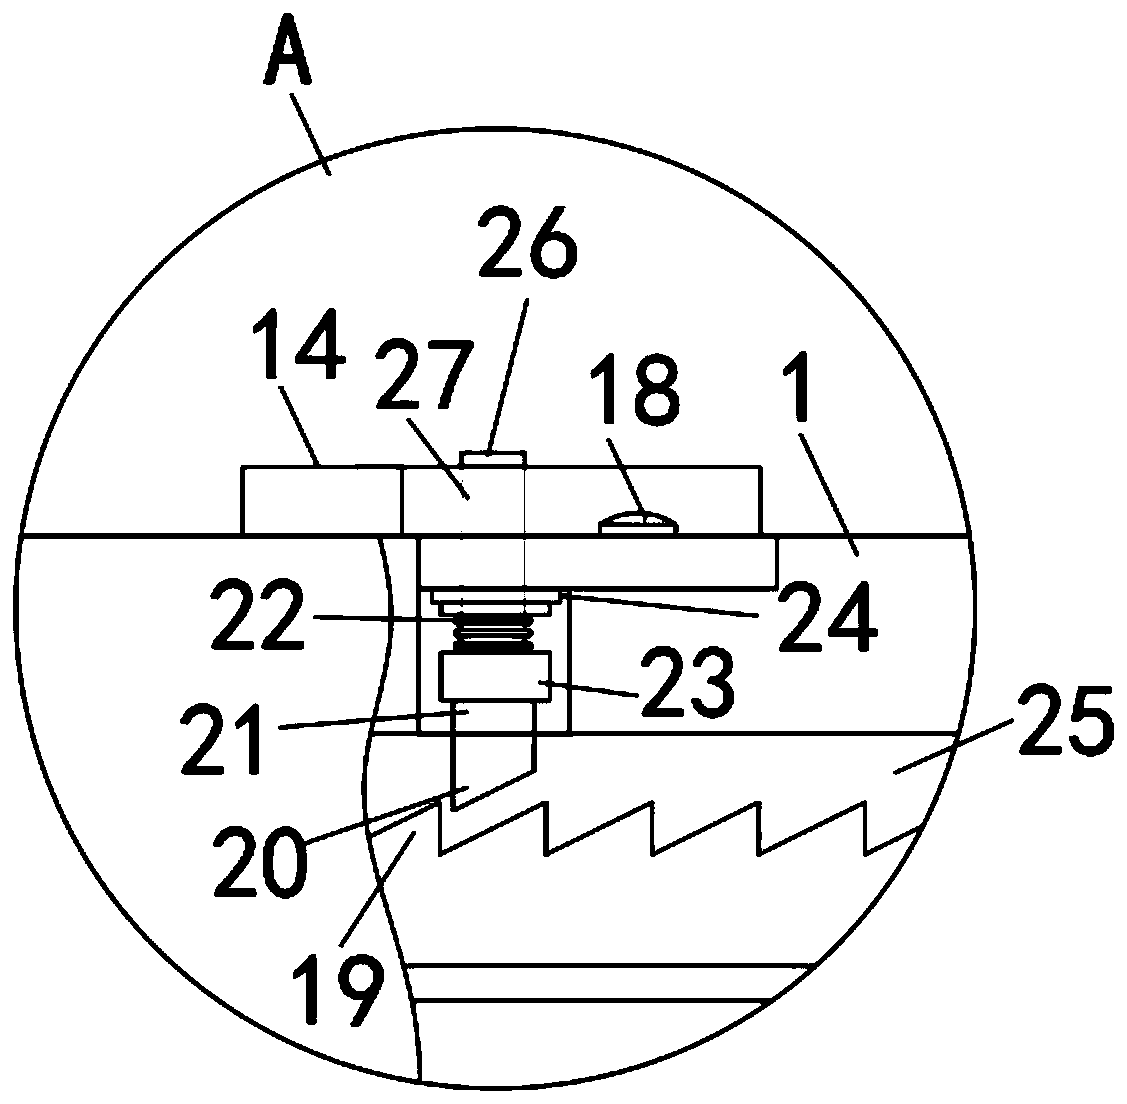 Direct-pressing mode locking device for mechanical equipment